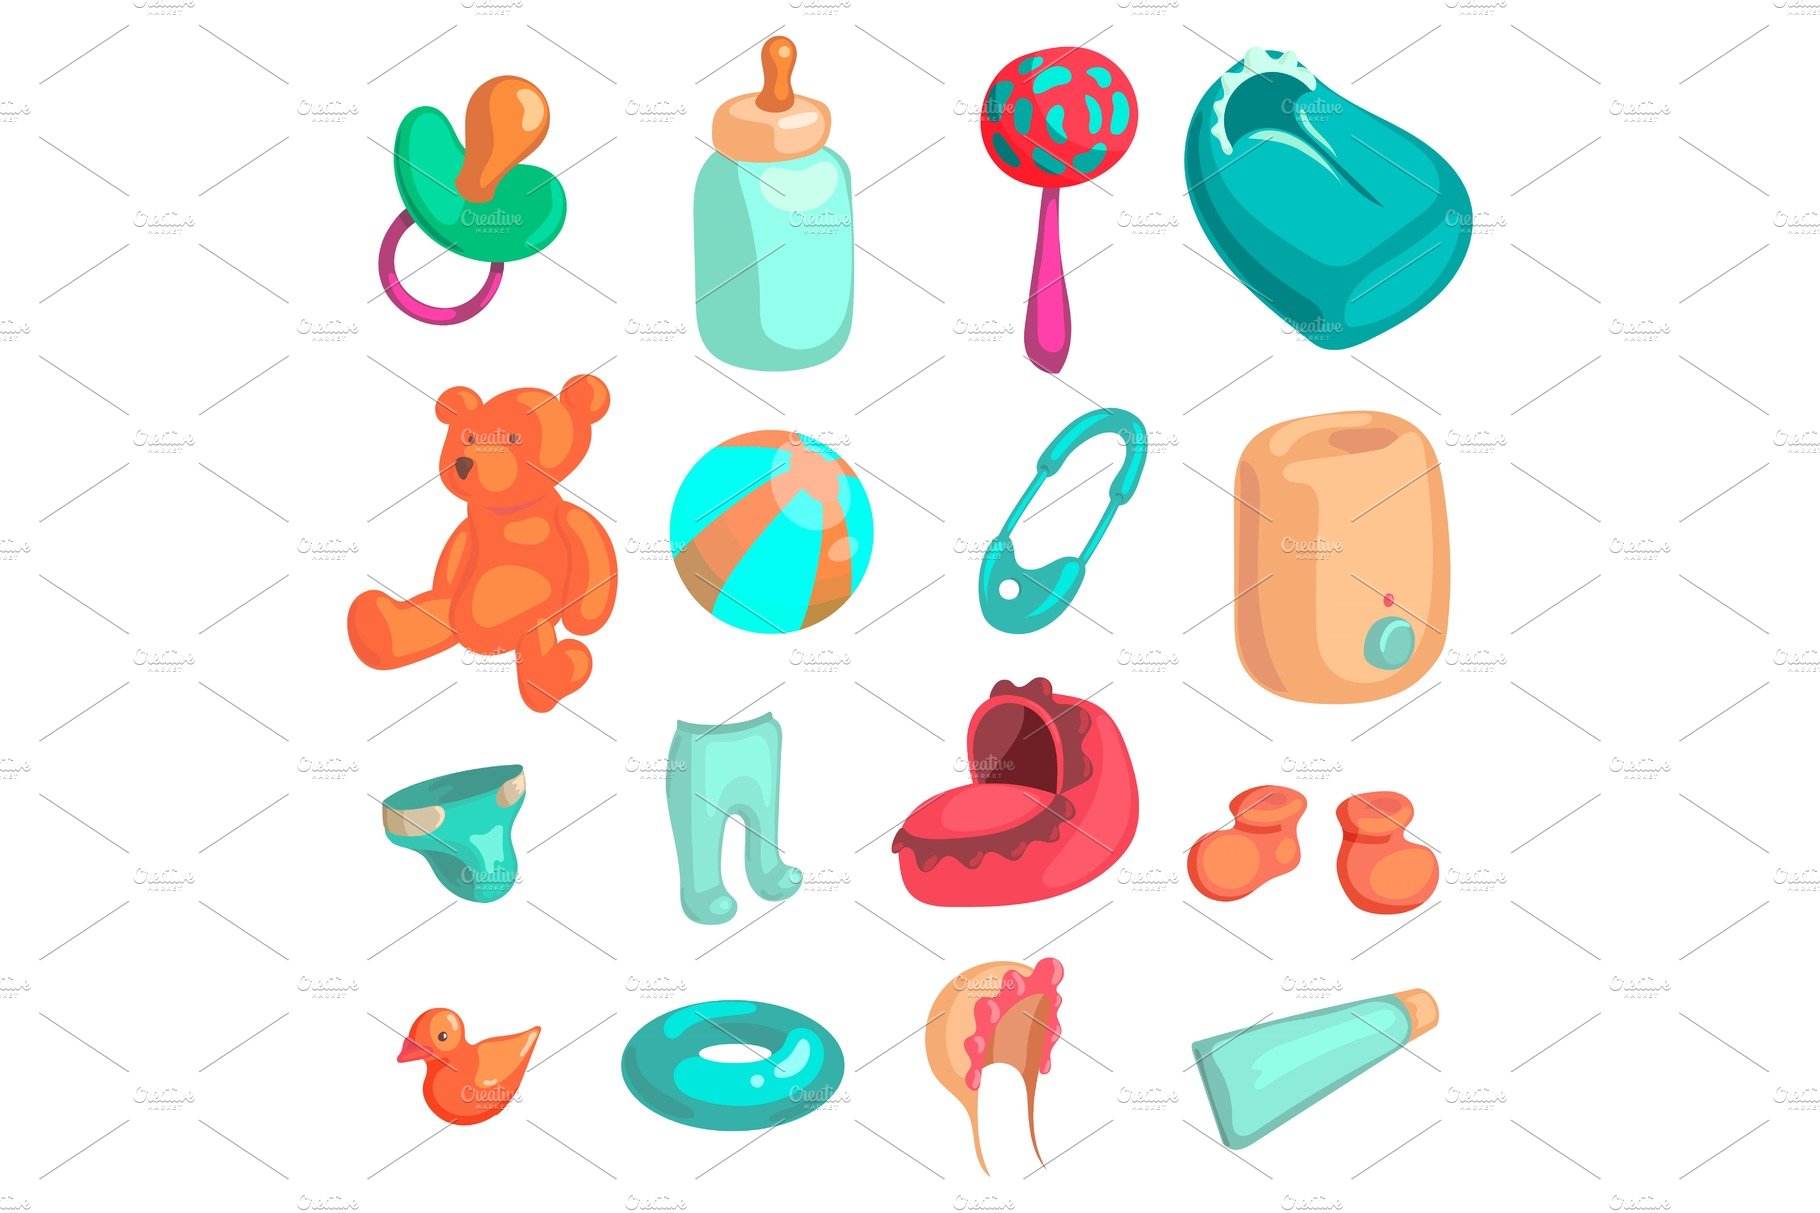 New baby biorn icons set, cartoon cover image.